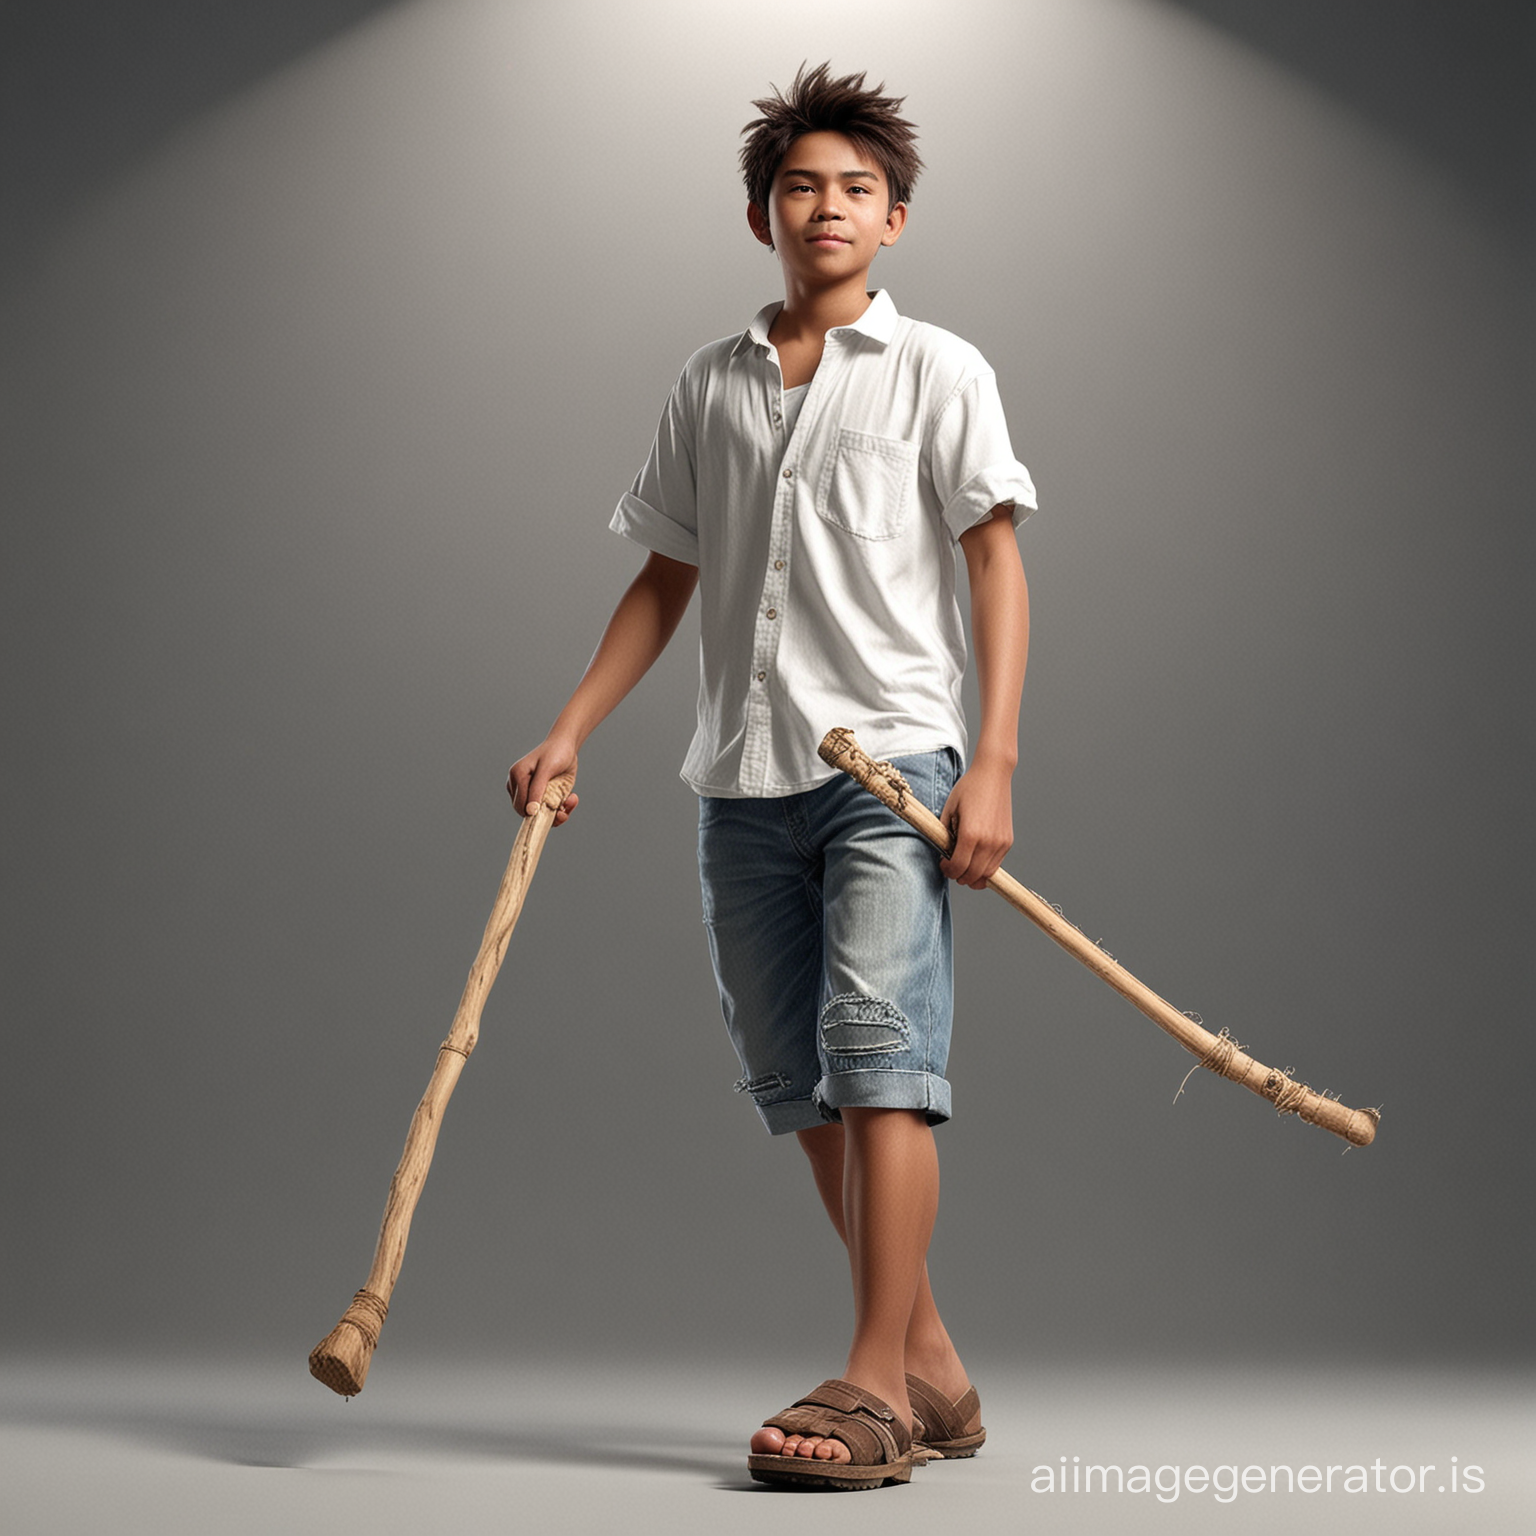 3D model of a indonesia teen male, 15 years old, with messy hair, wearing an open white short-sleeved shirt, jeans, and wooden clogs. His hands is carrying a long stick, Studio lights. Dynamic action pose, 16k, ultra realistic, rainforest background 